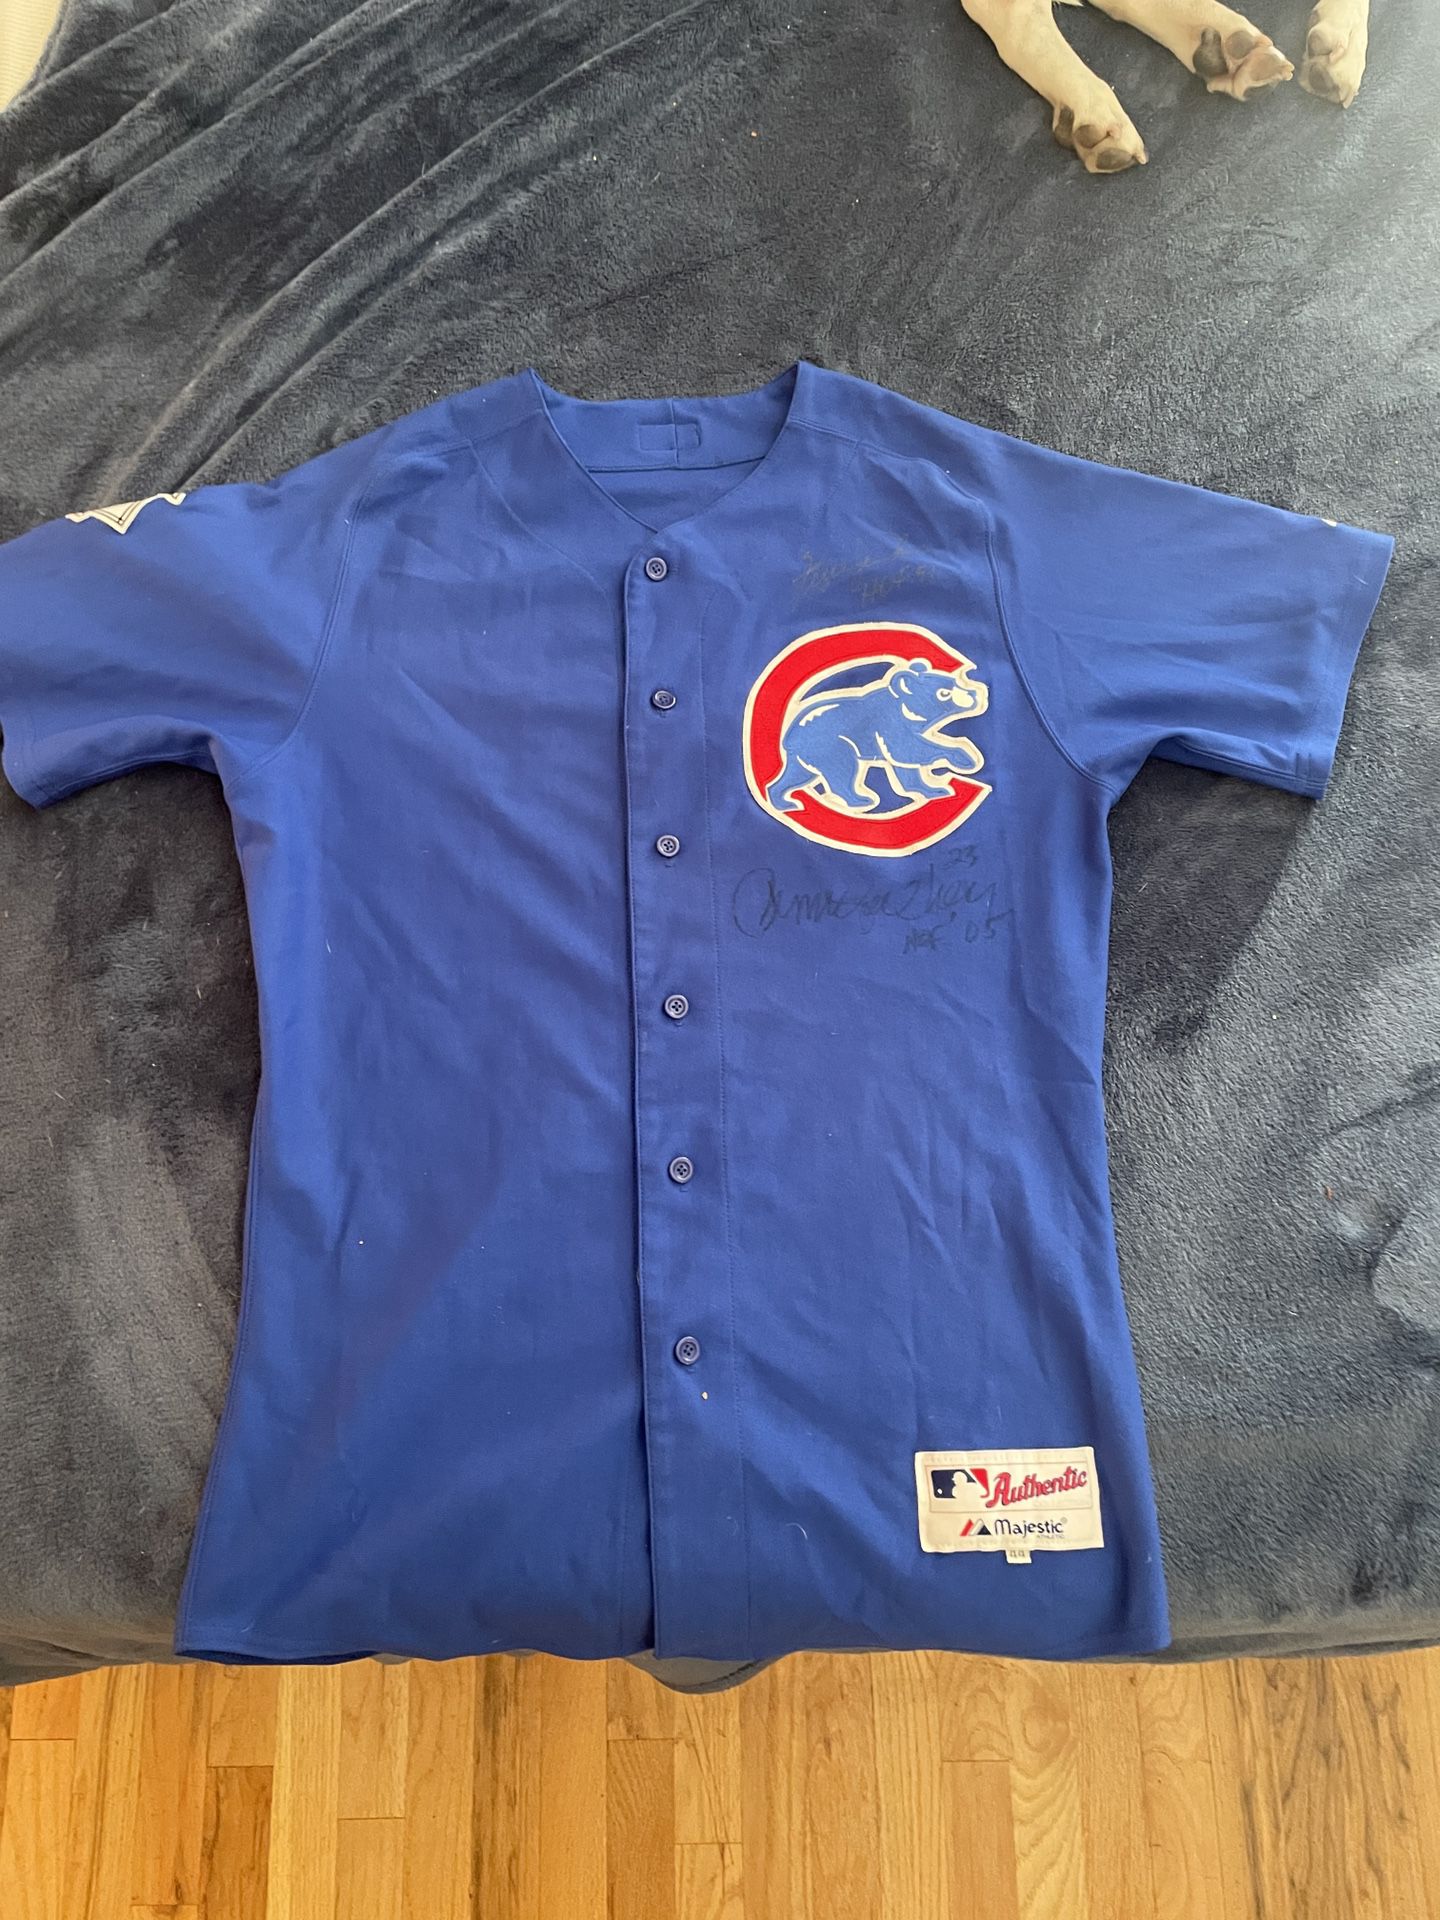 Chicago Cubs Signed Jersey Hall of Fame for Sale in Chicago, IL